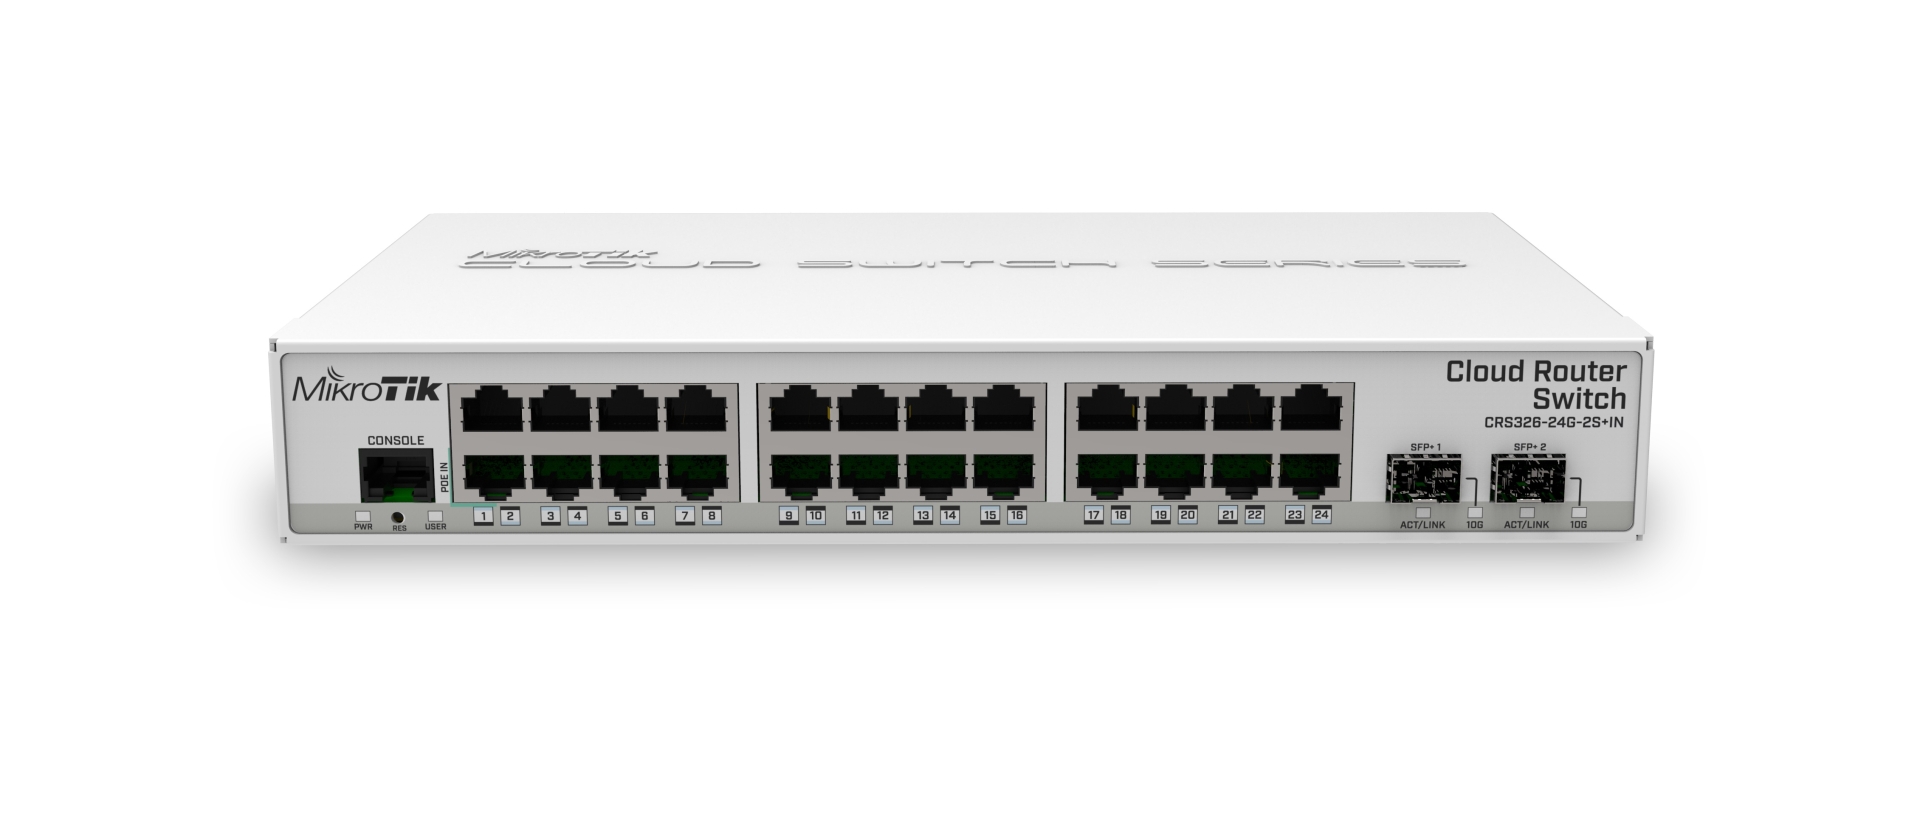 MIKROTIK Cloud Router Switch (CRS326-24G-2S+IN) (License level 5)